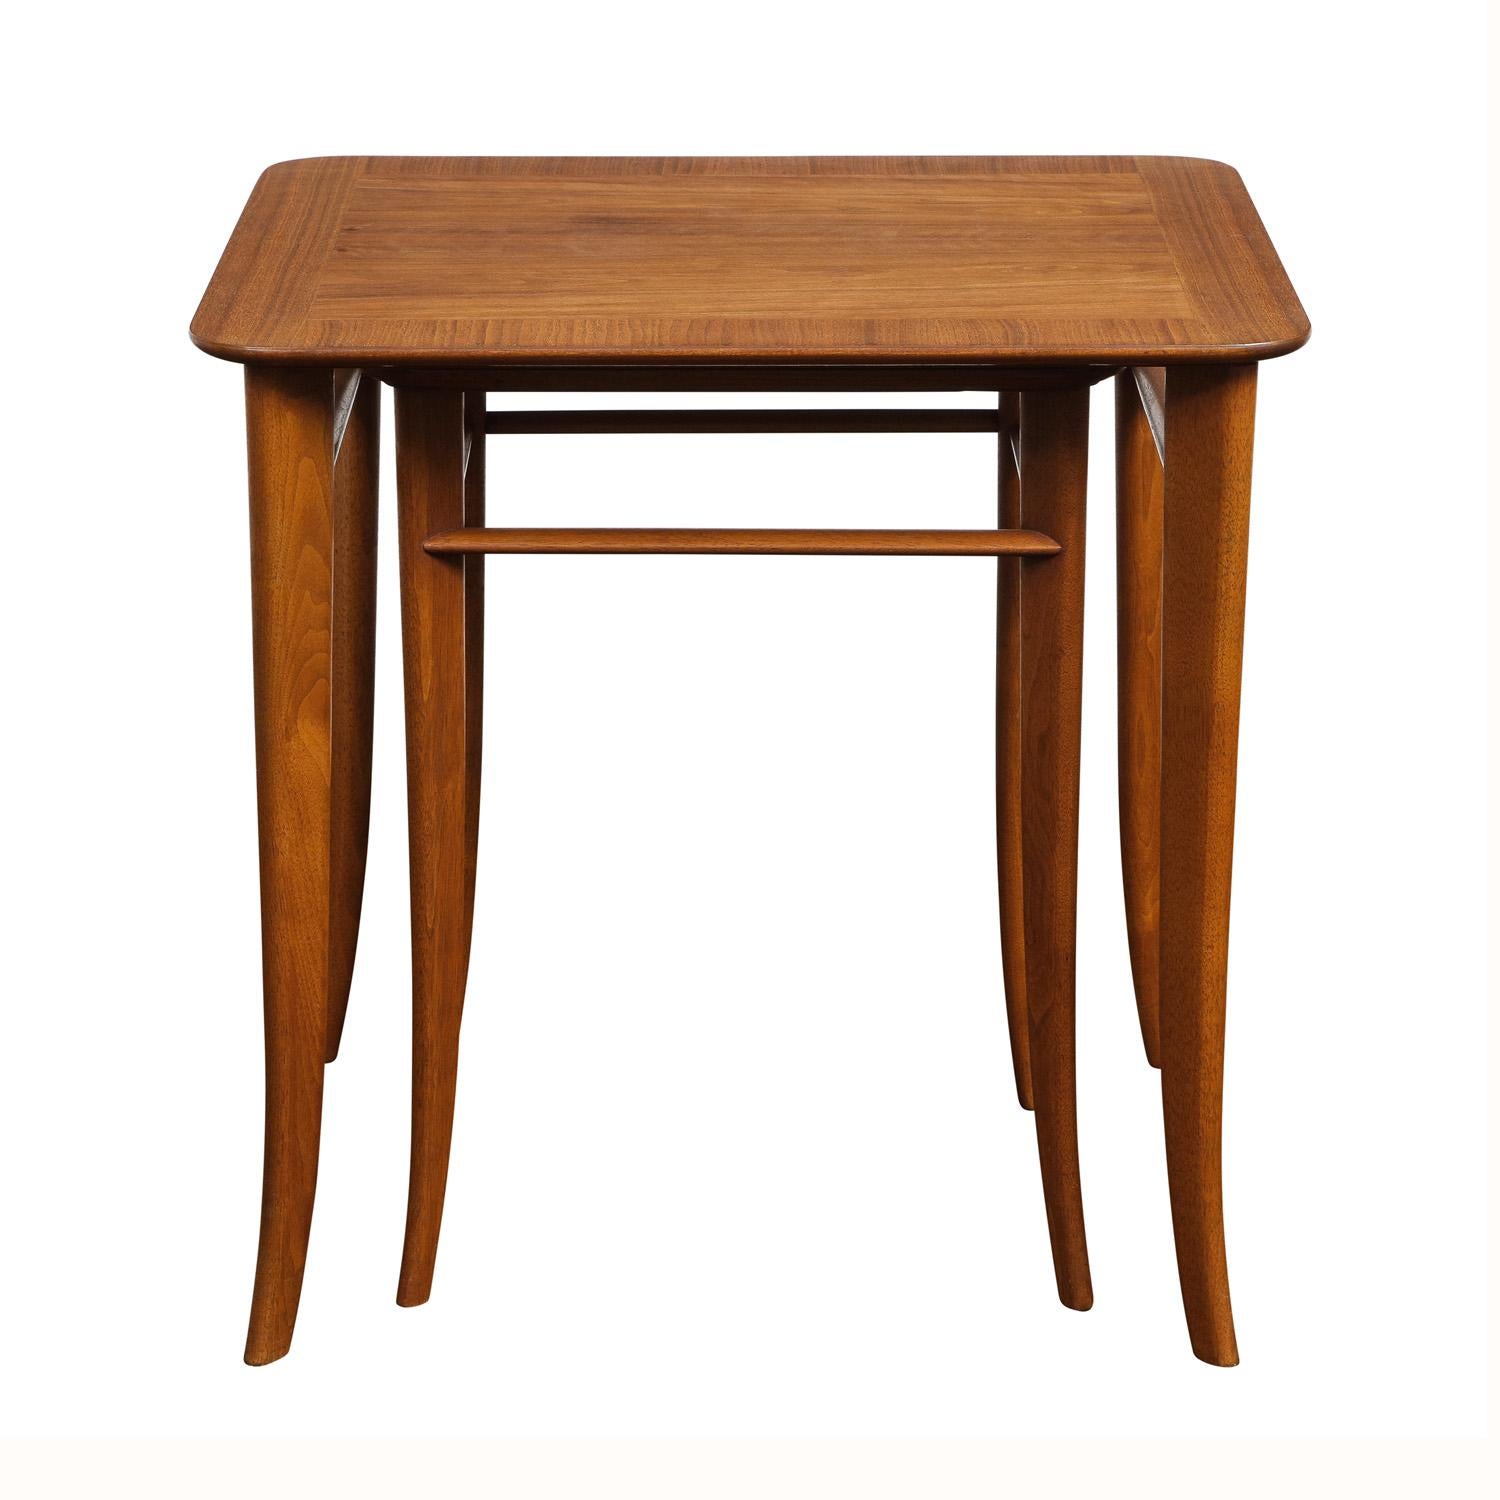 Classic pair of nesting tables model 3323 in walnut with flared leg design by T.H. Robsjohn-Gibbings for Widdicomb, American 1950's. These tables are very elegant and beautifully made.

Reference:  This set of nesting tables is shown in the